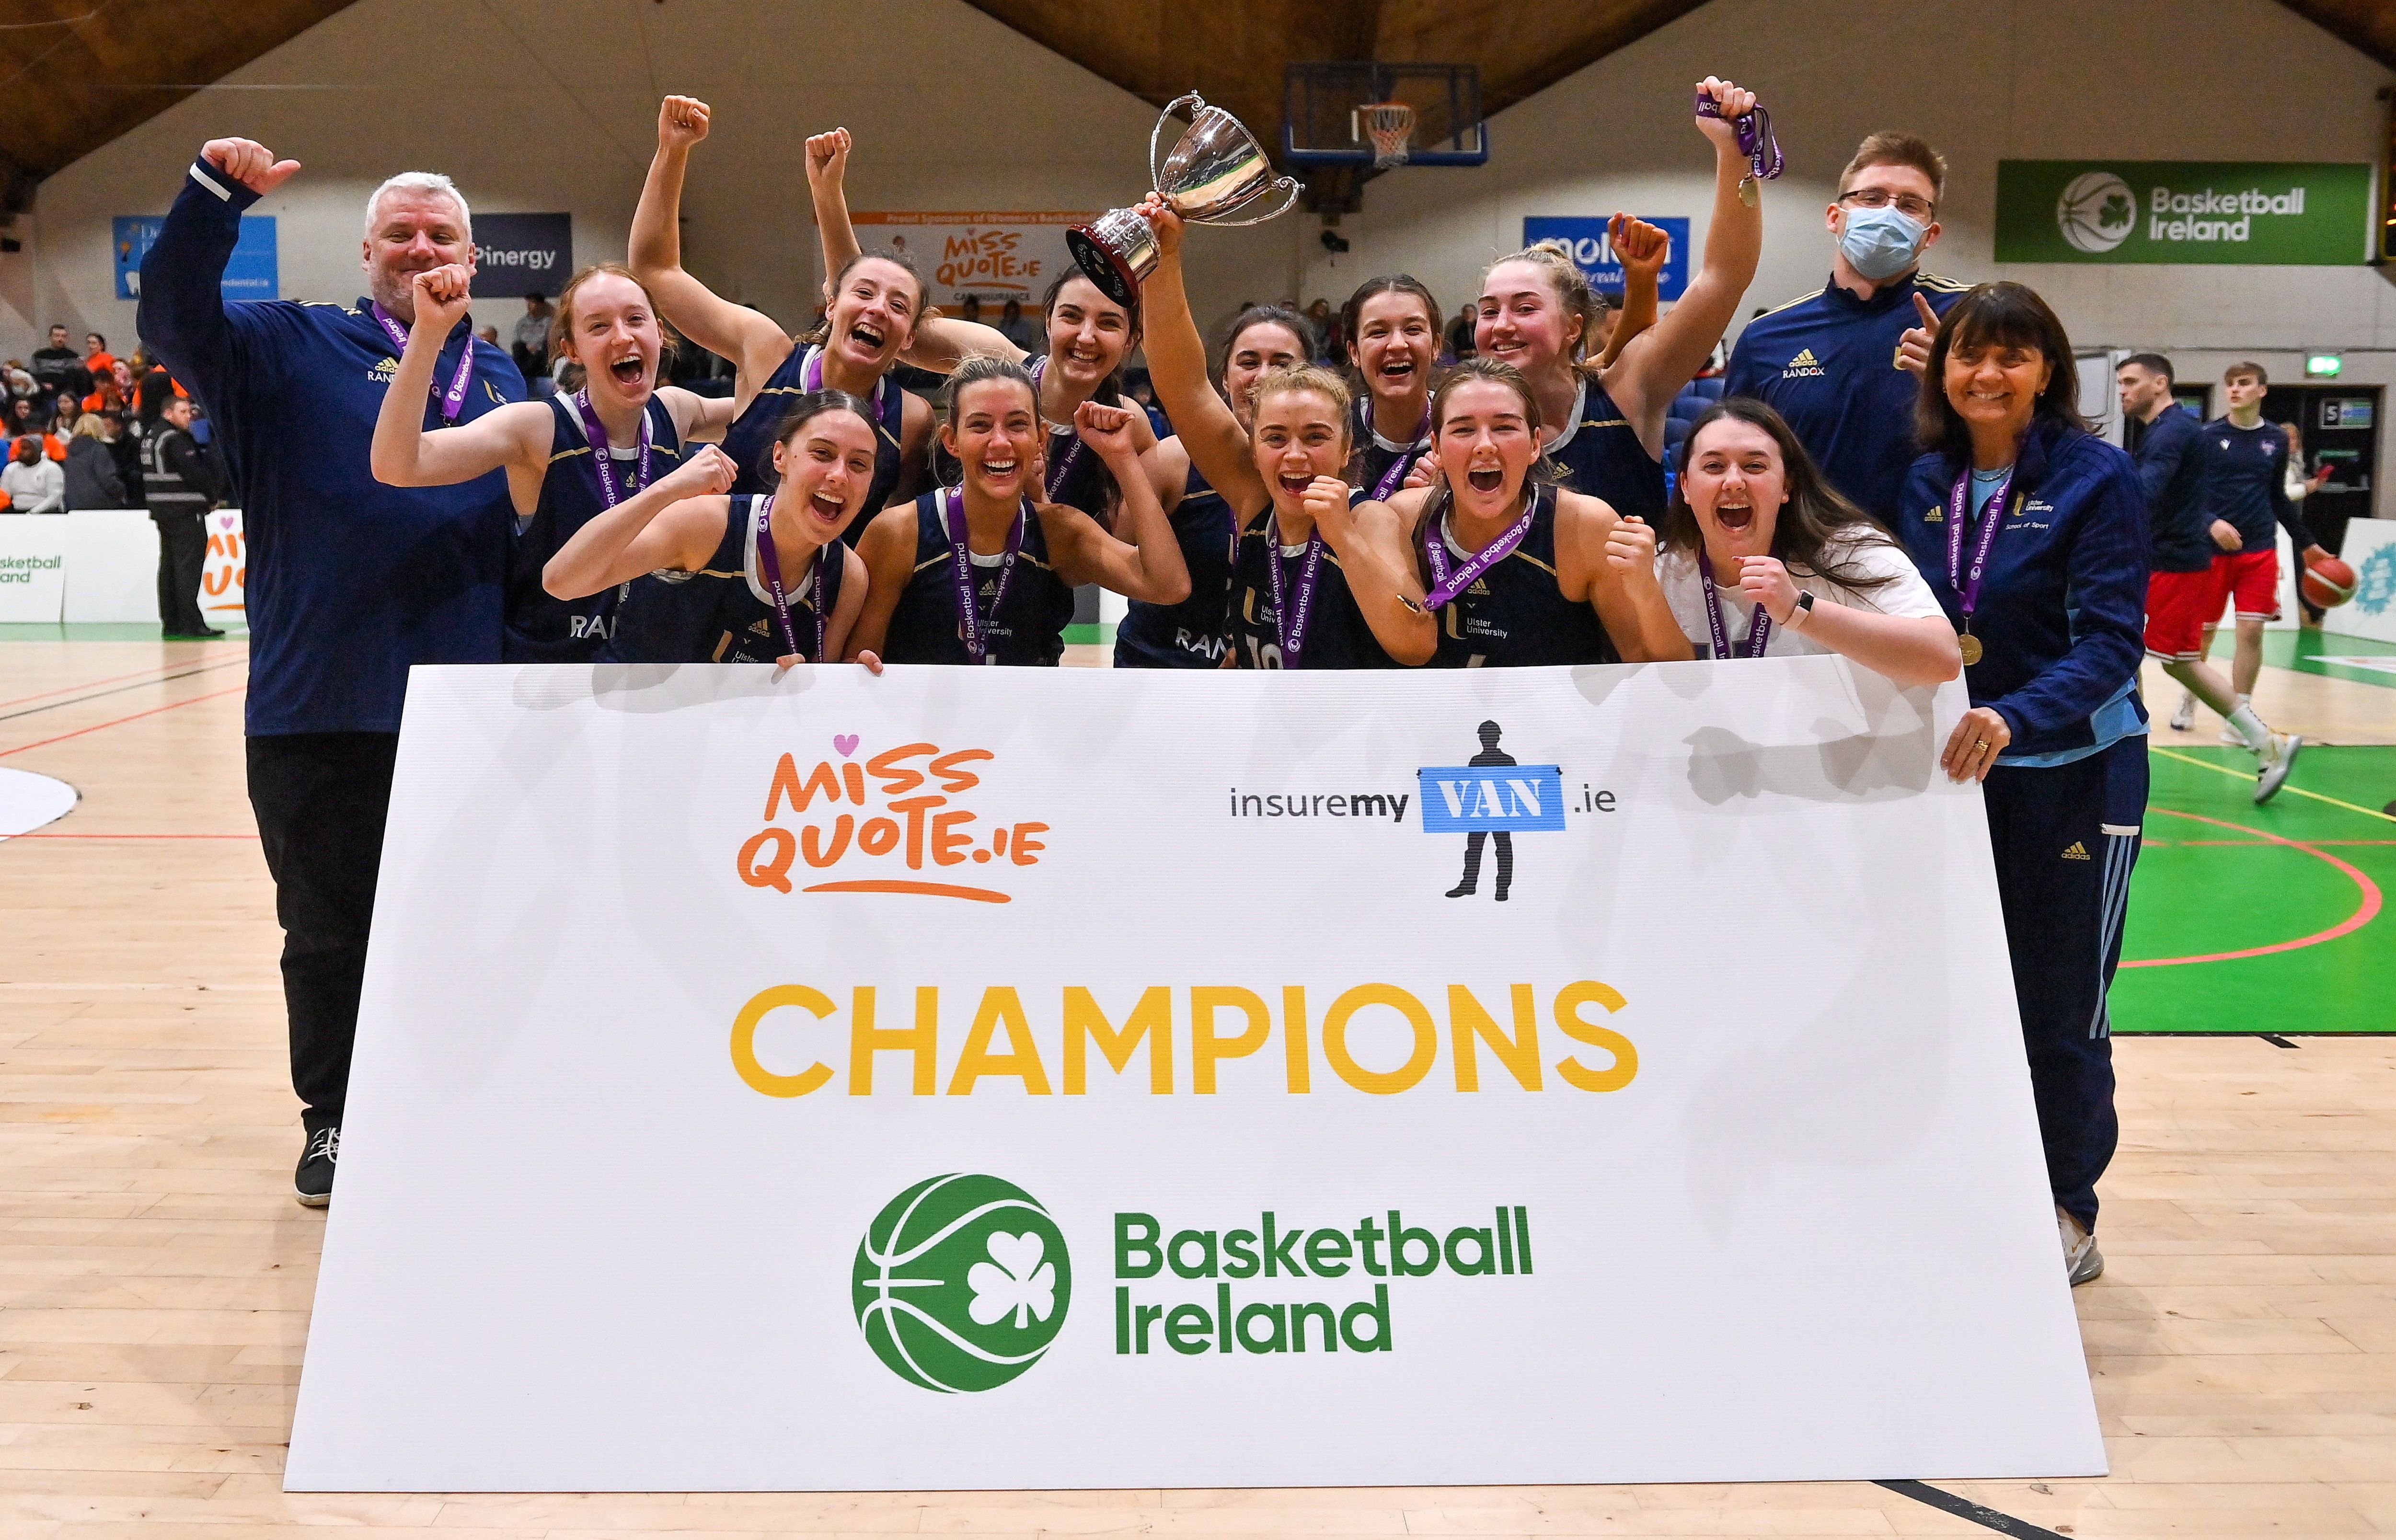 Ulster University were crowned champions 